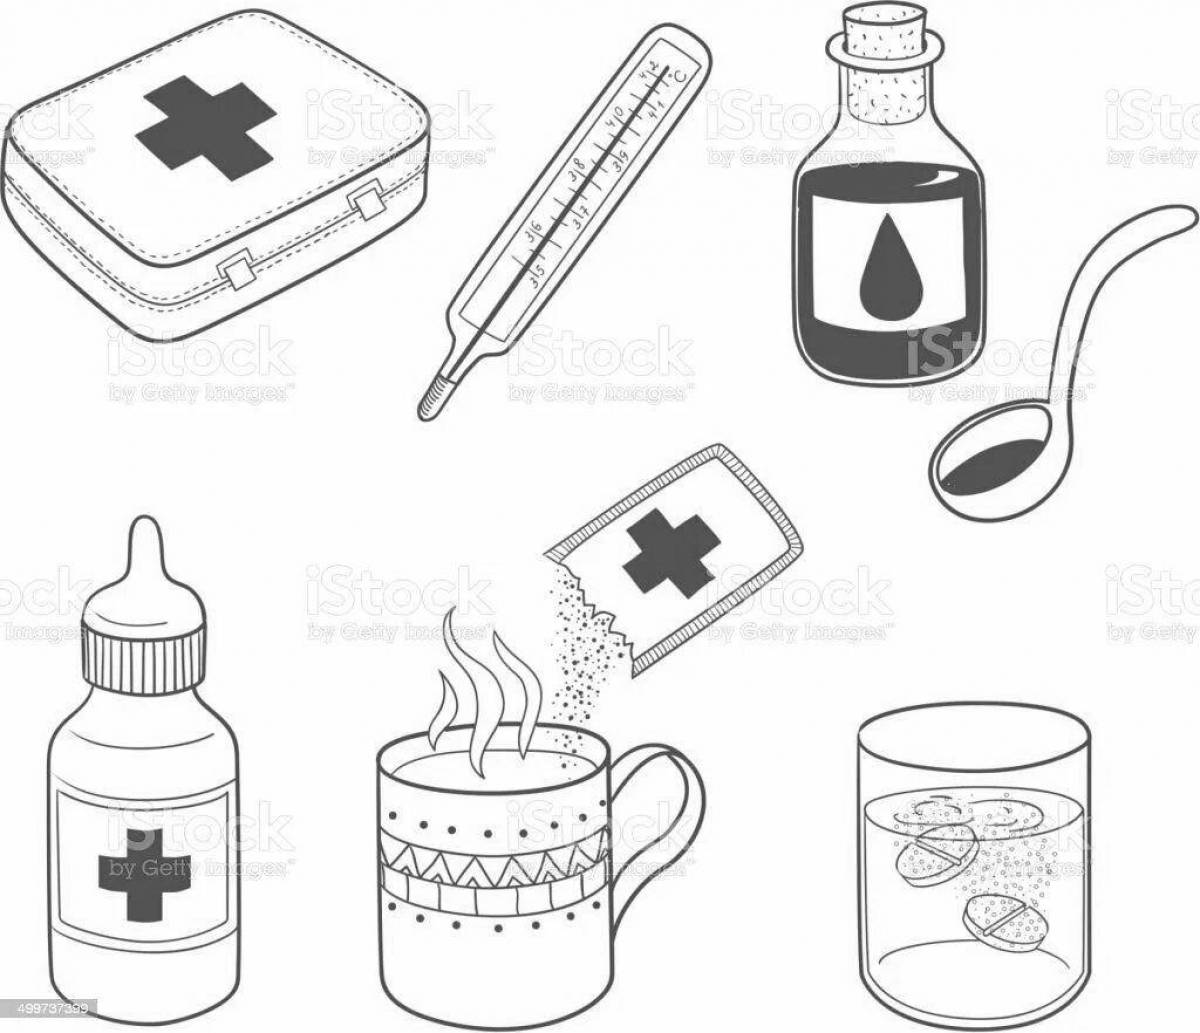 Coloring book joyful prevention of influenza and SARS